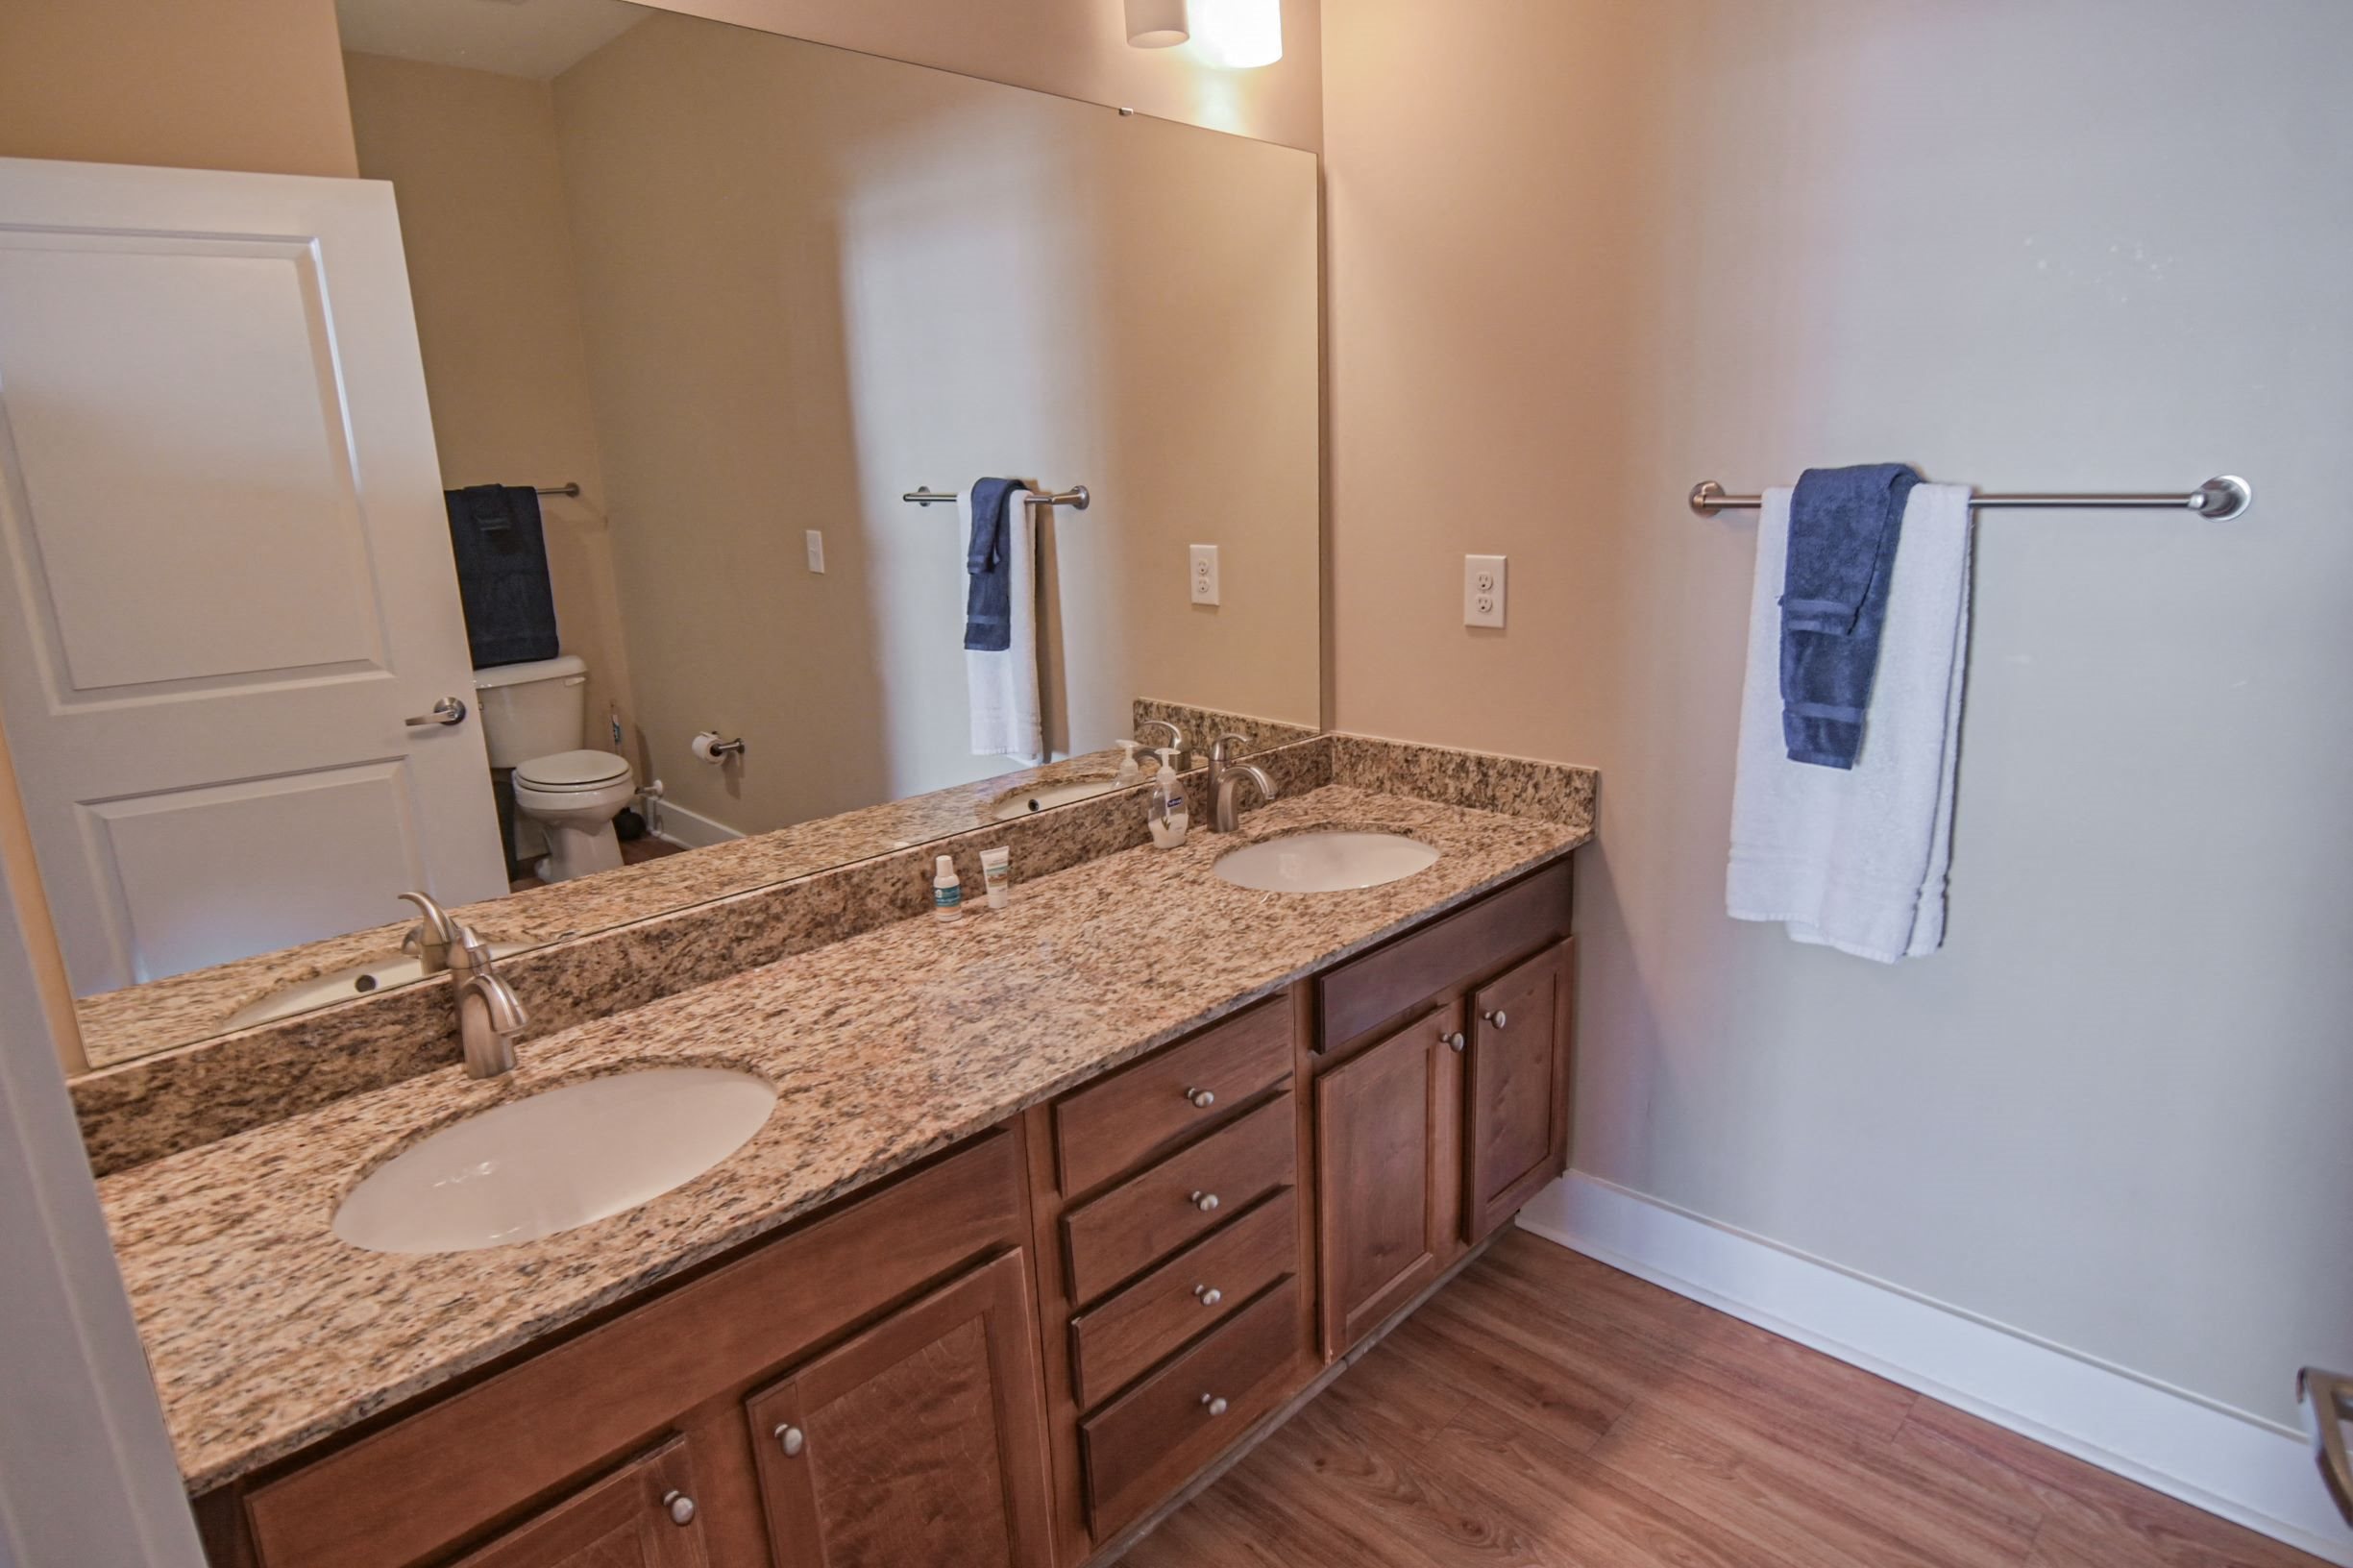 Bathroom at Grand View Luxury Apartments in Wilmington, NC